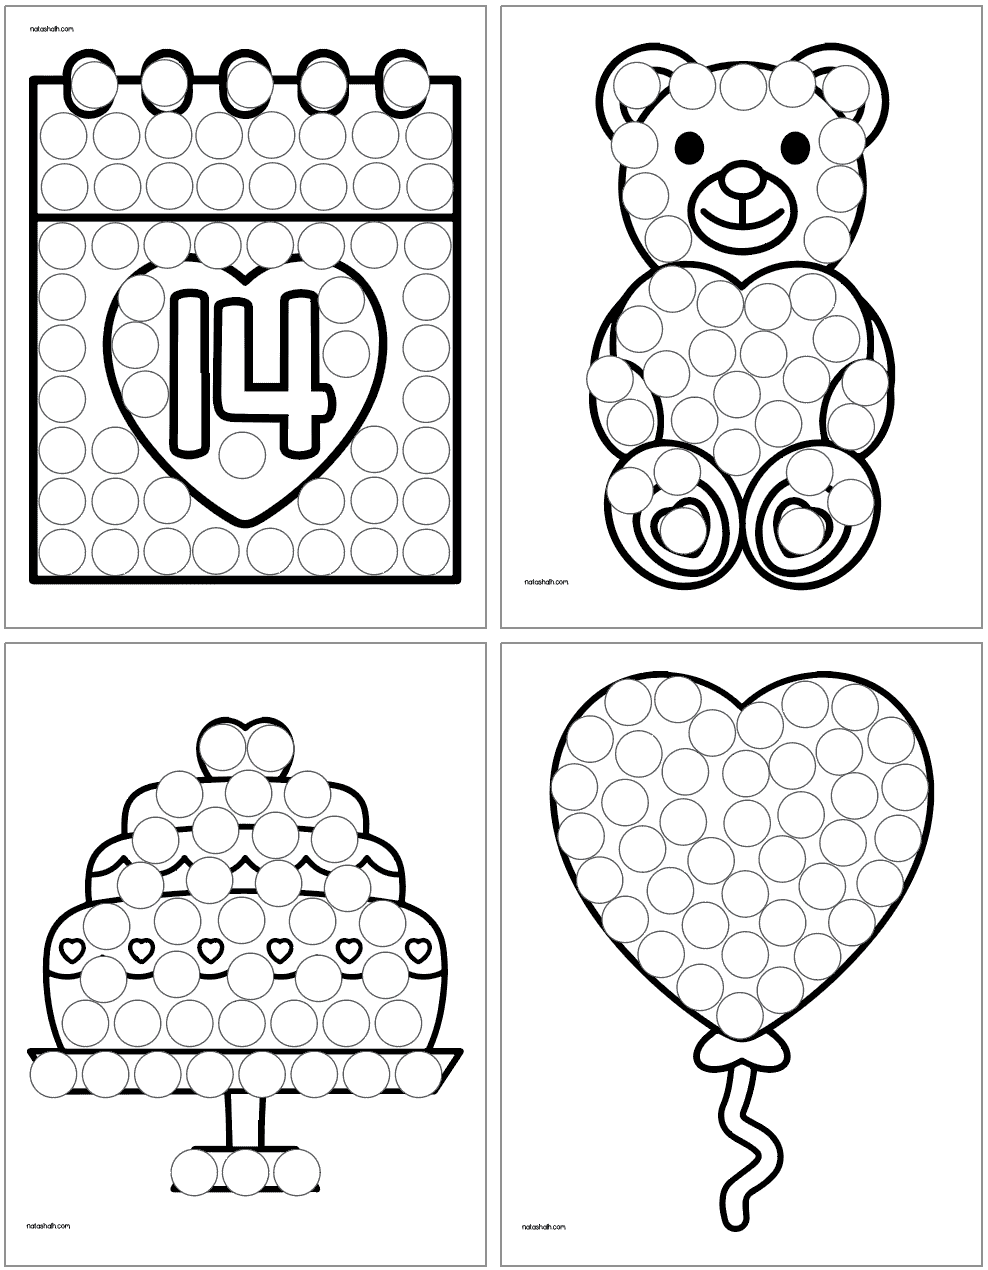 Four dot marker coloring pages for Valentine's Day including: a calendar, a teddy b ear with a heart, a cake, and a heart balloon